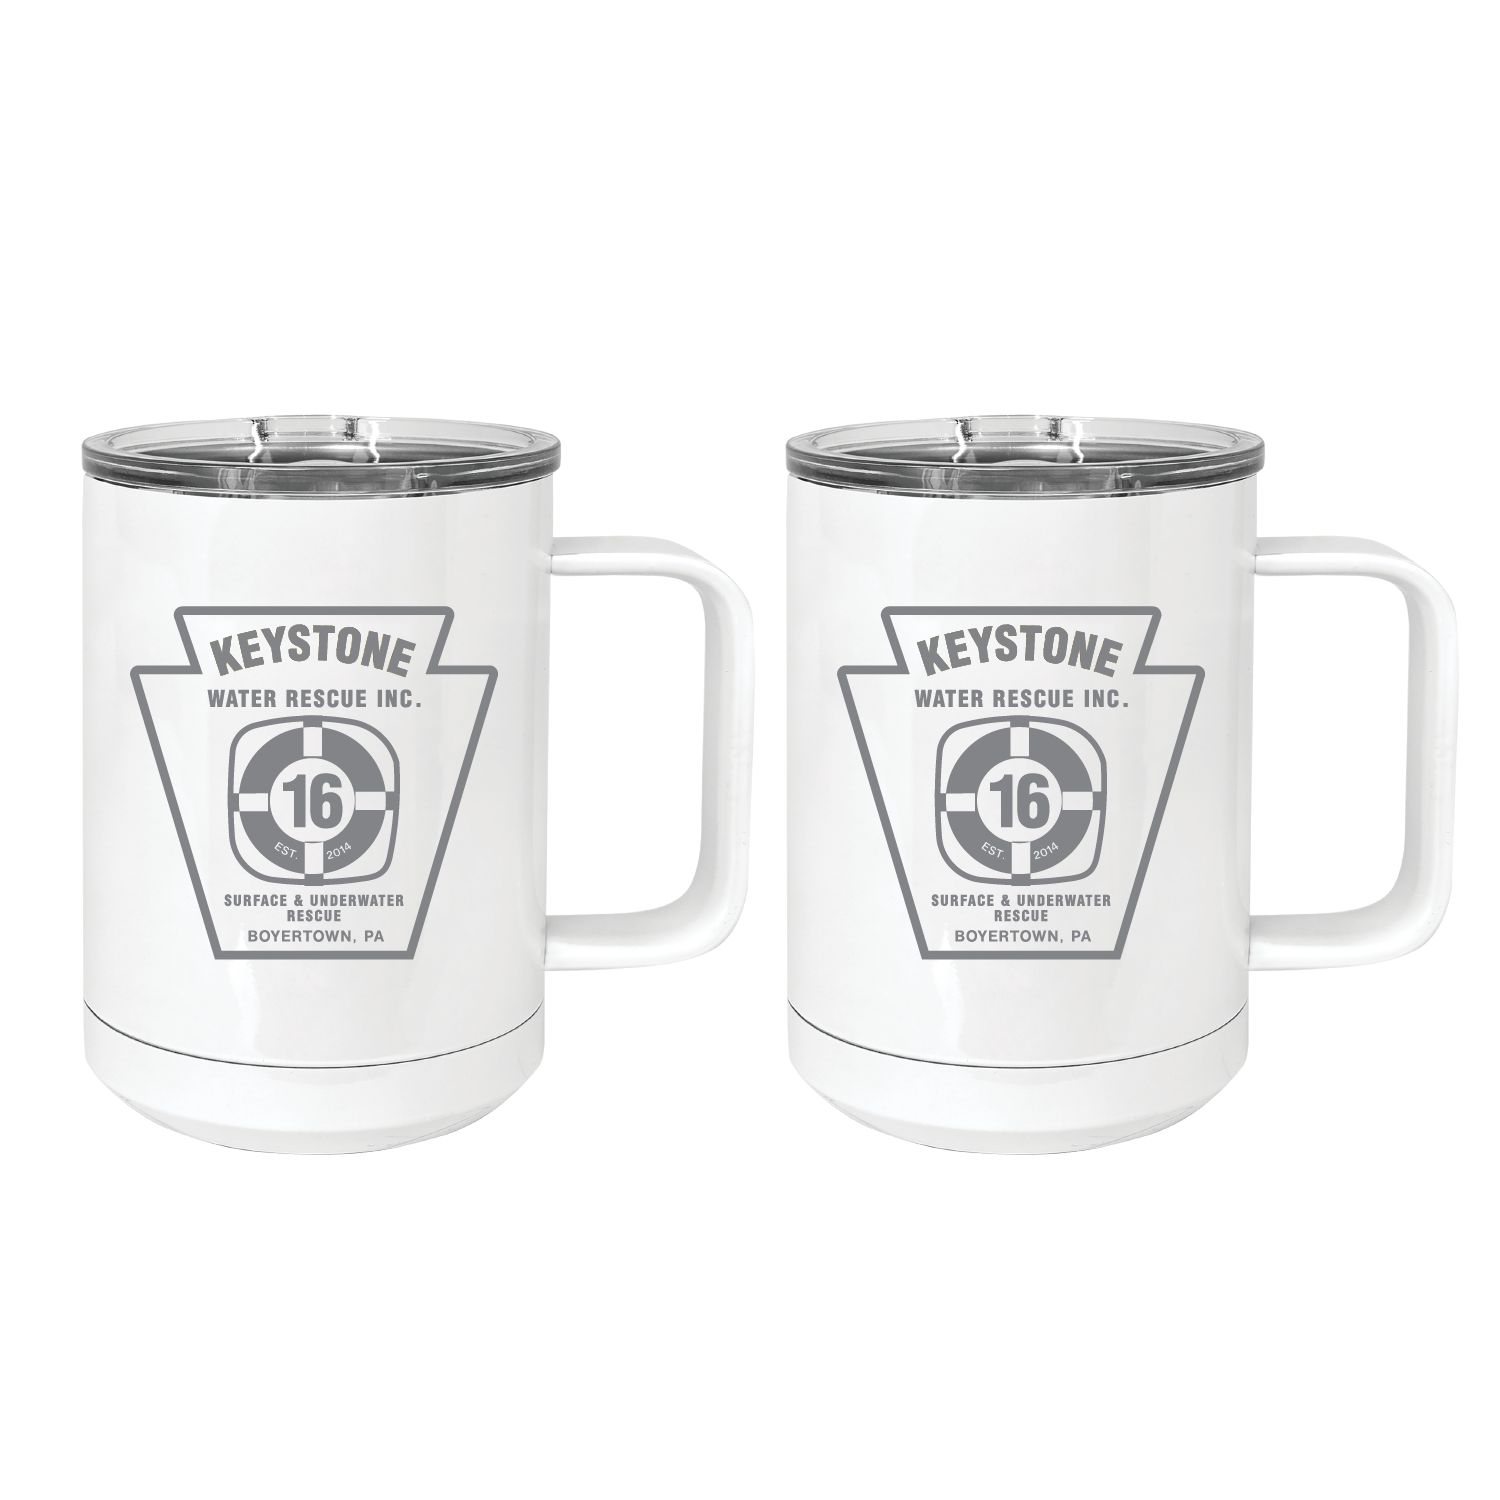 15oz Stainless Steel Laser Engraved Coffee Mugs at Balloons Tomorrow